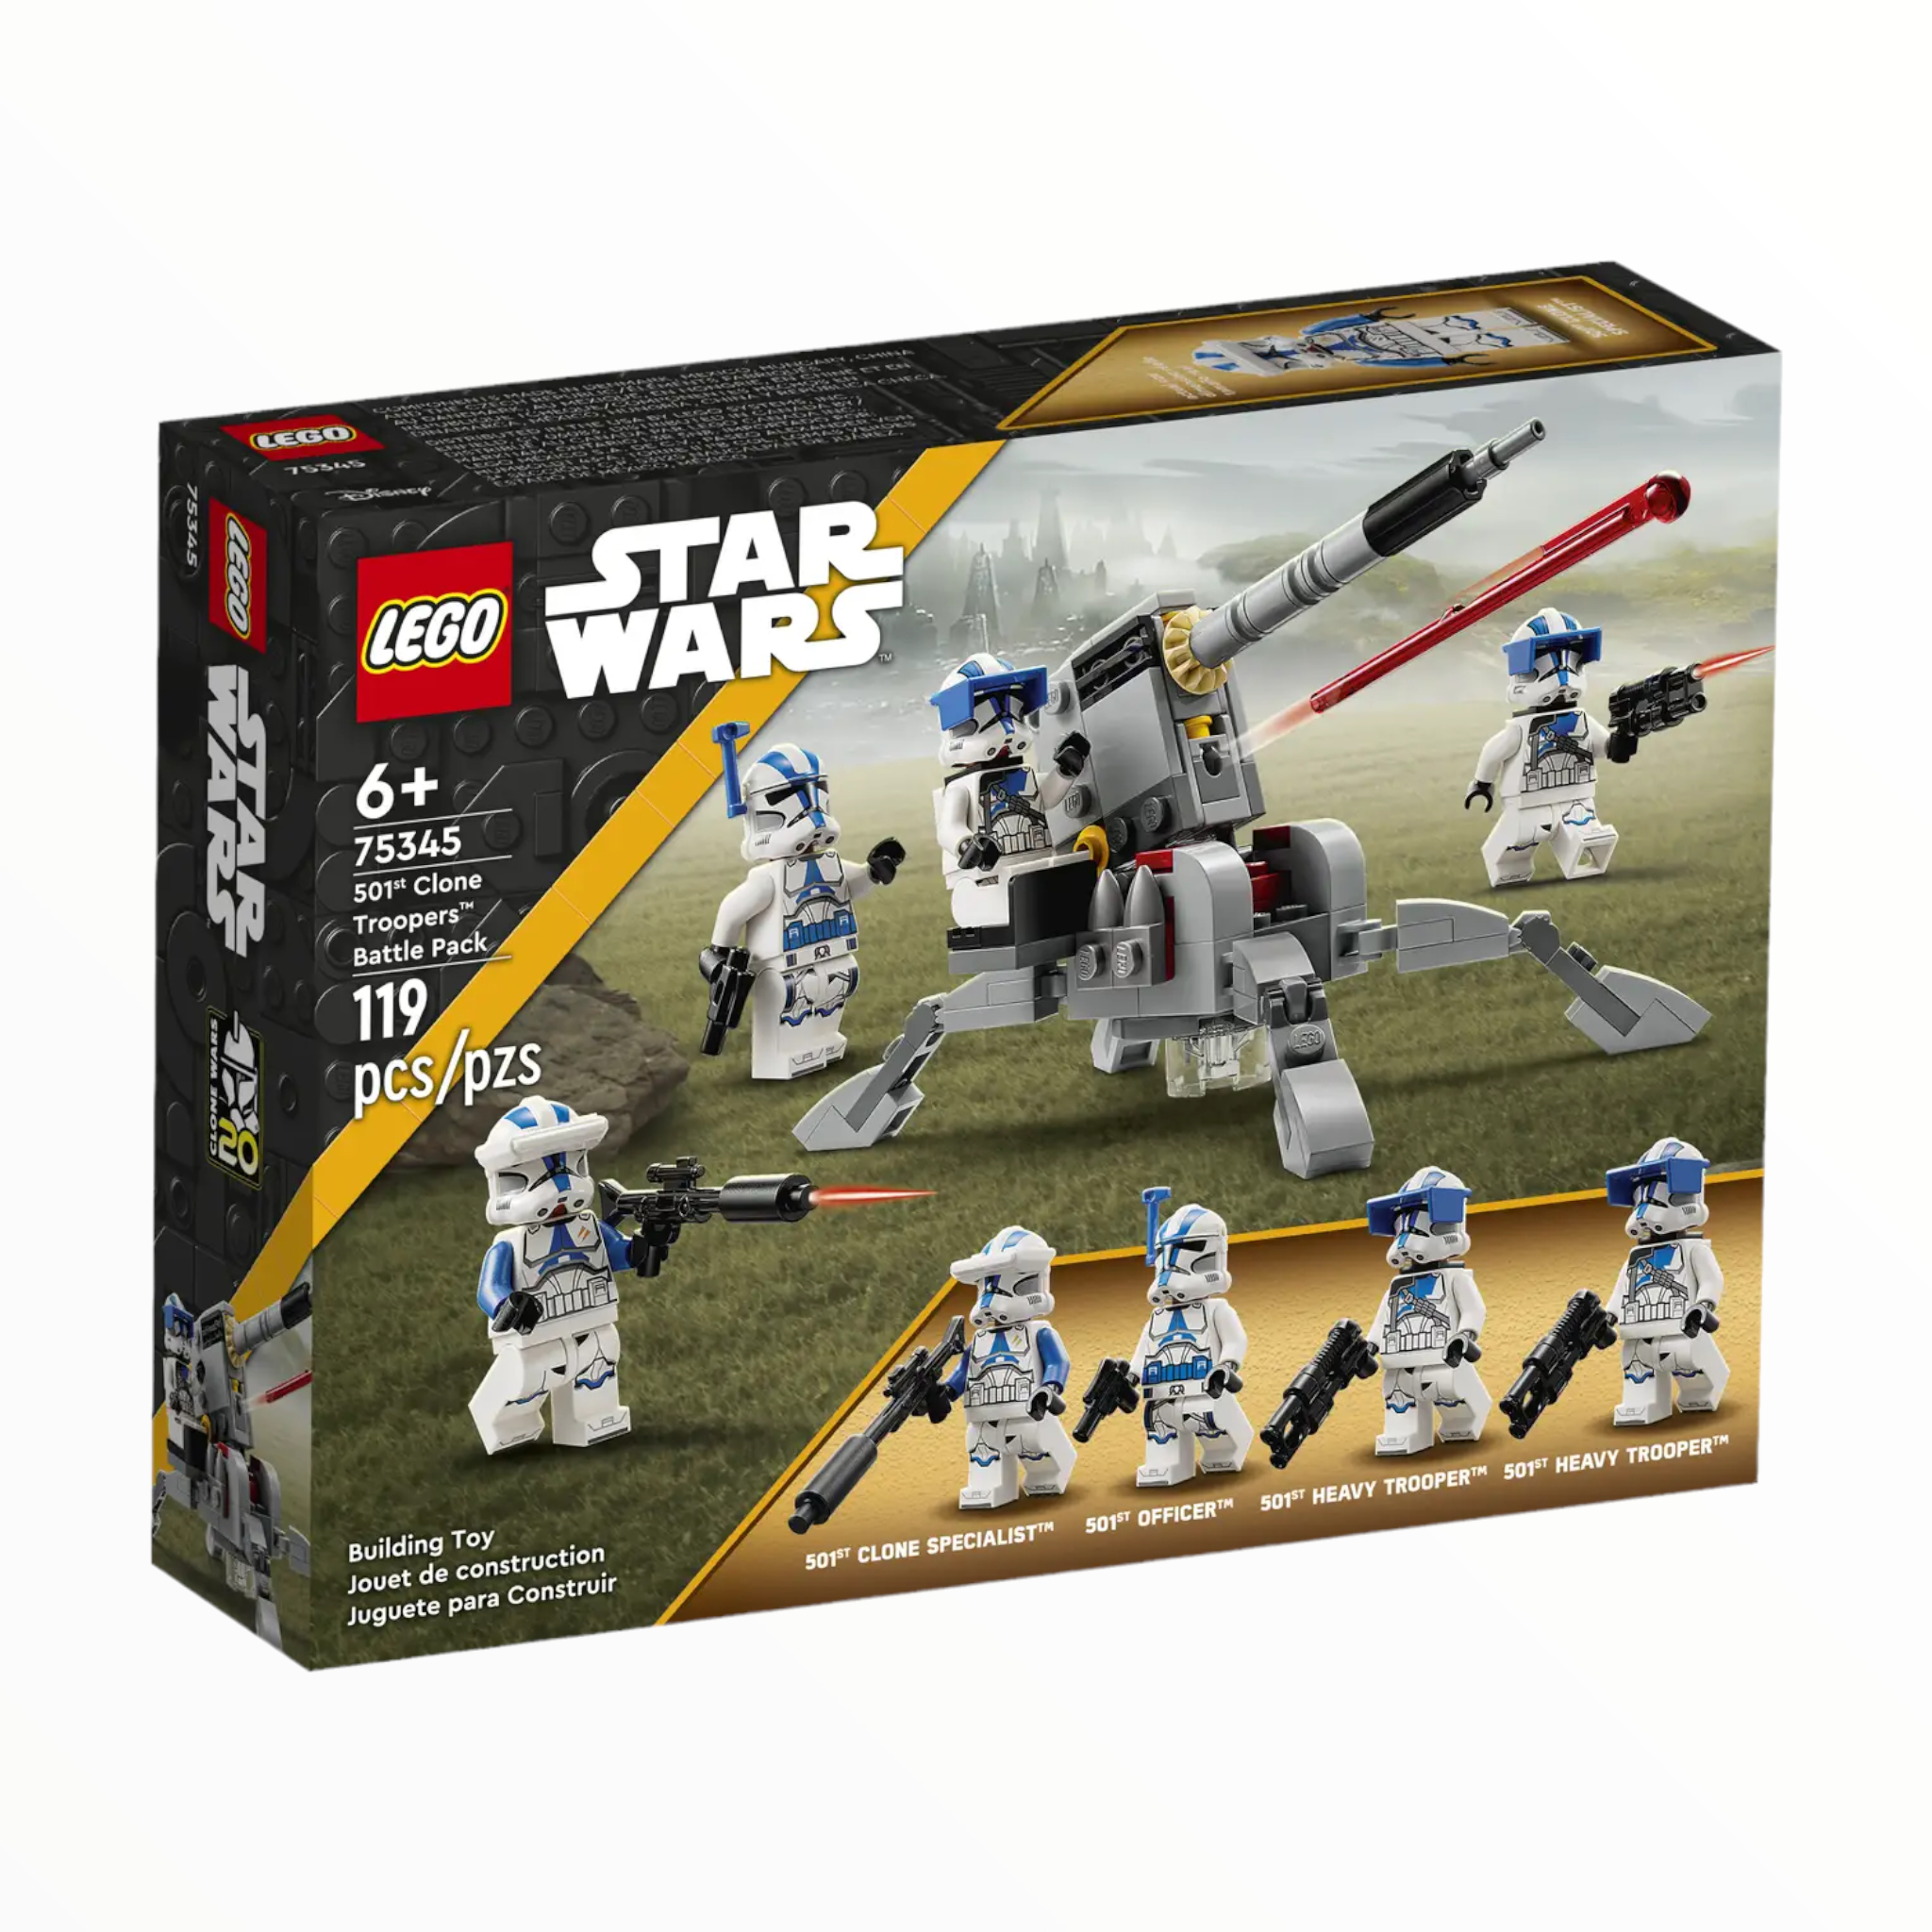 75345 Star Wars 501st Clone Troopers Battle Pack